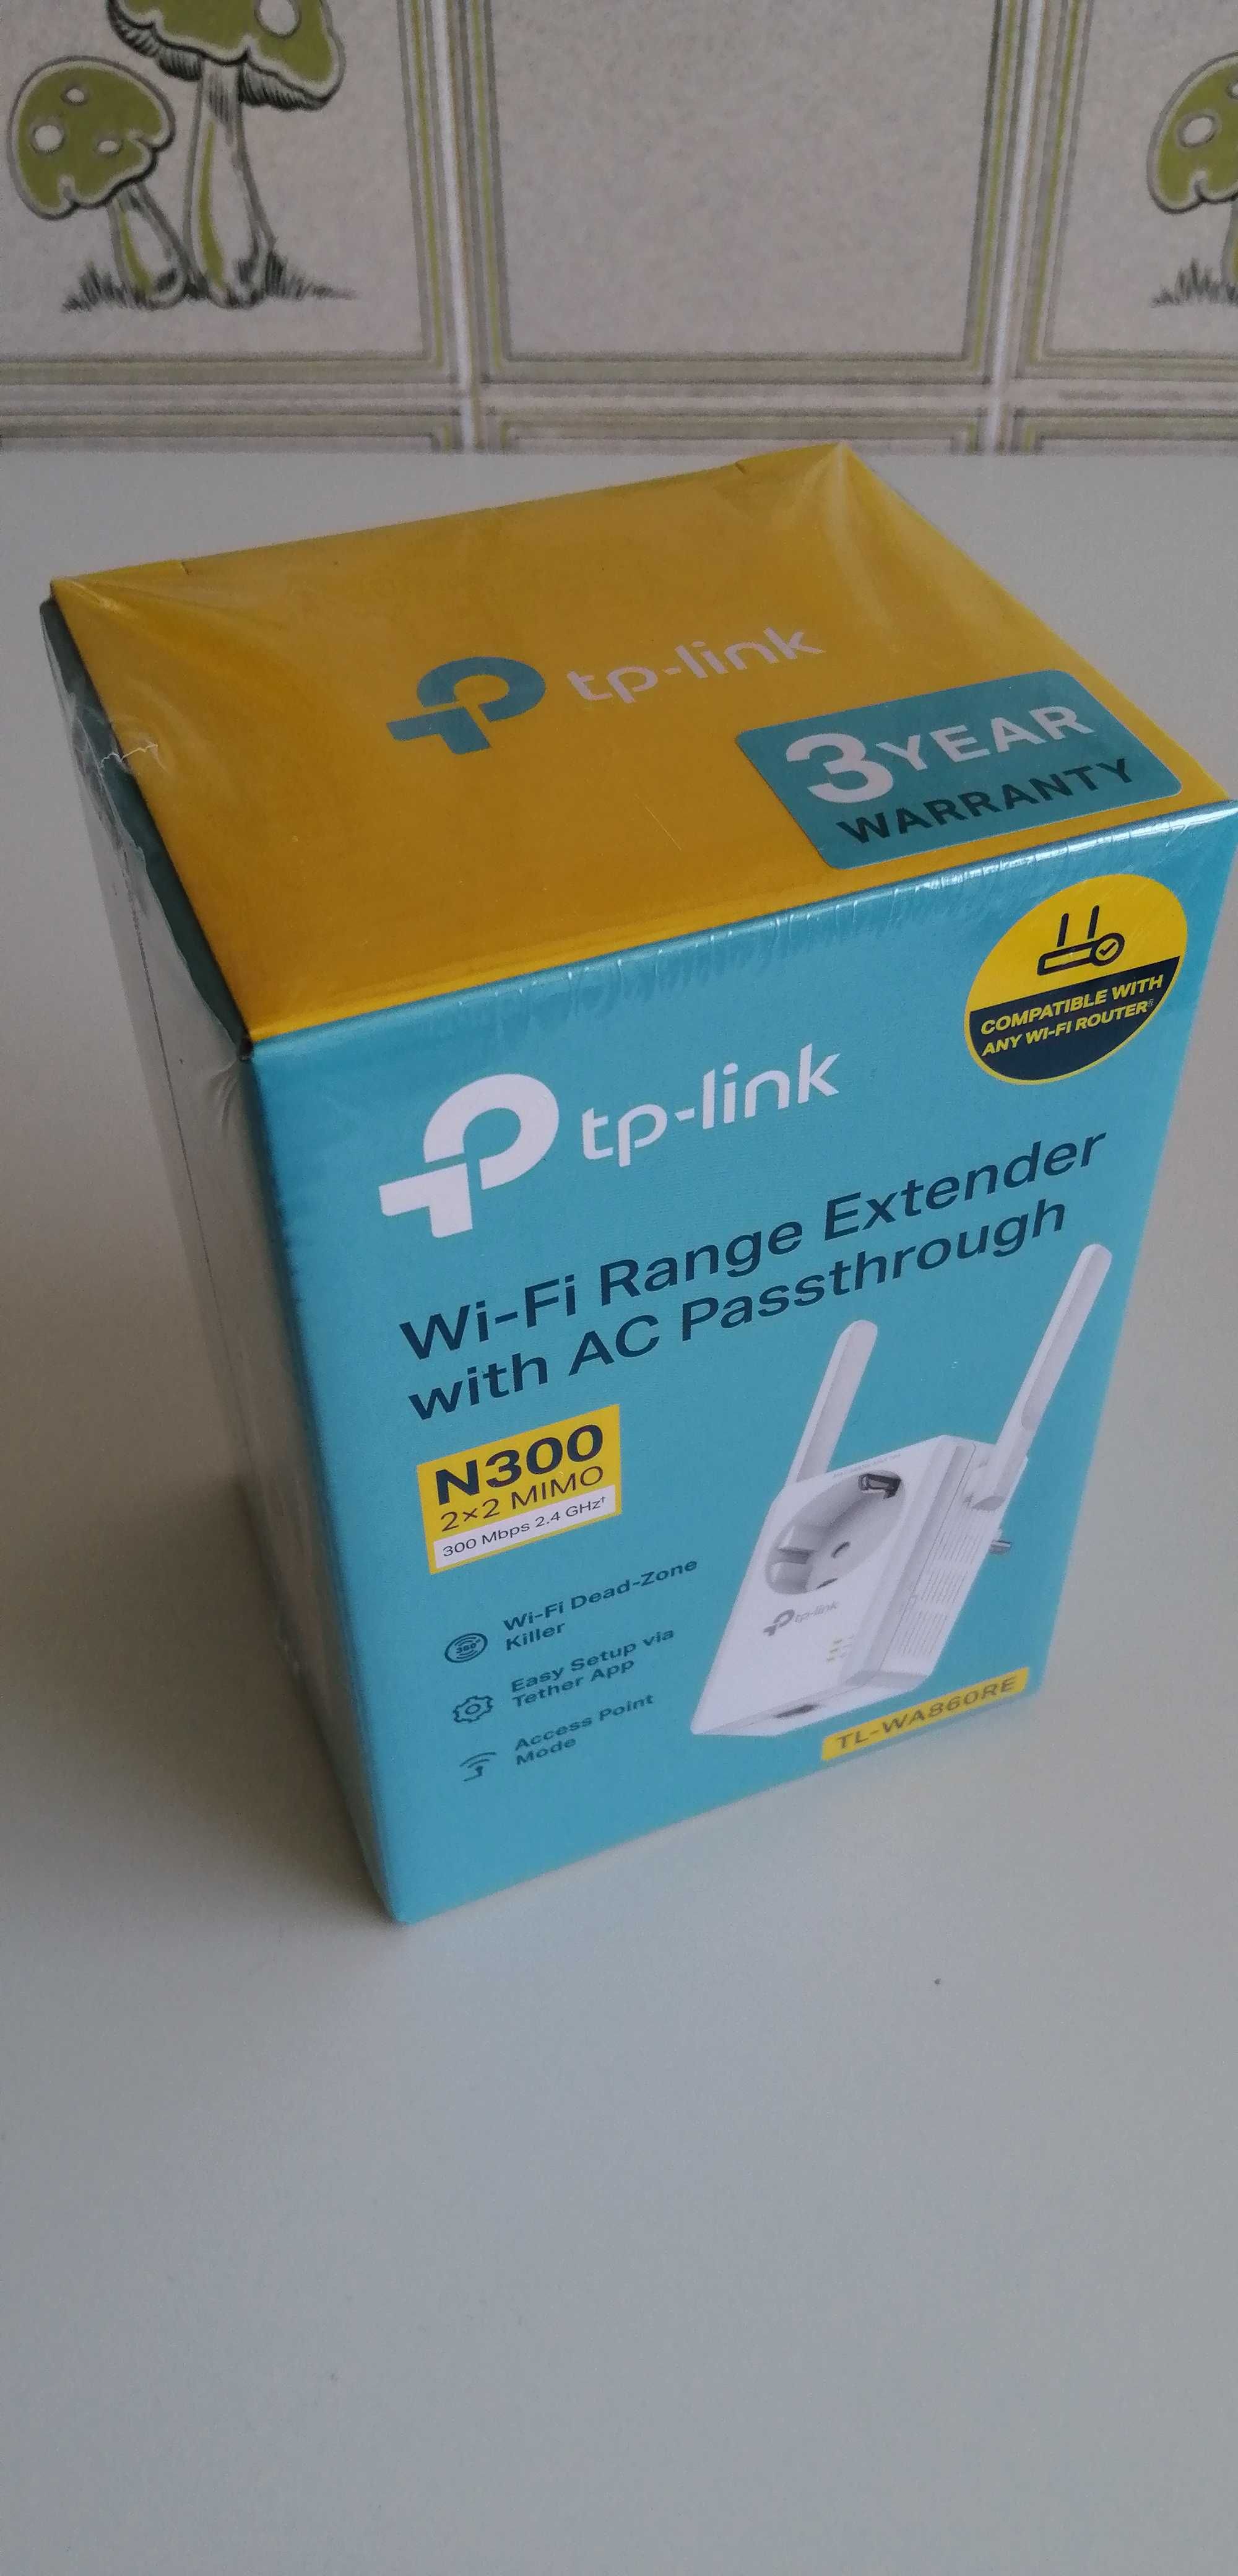 Repetidor wi-fi TP-link AC1200 / RE200/RE205 / WPA4220 Kit